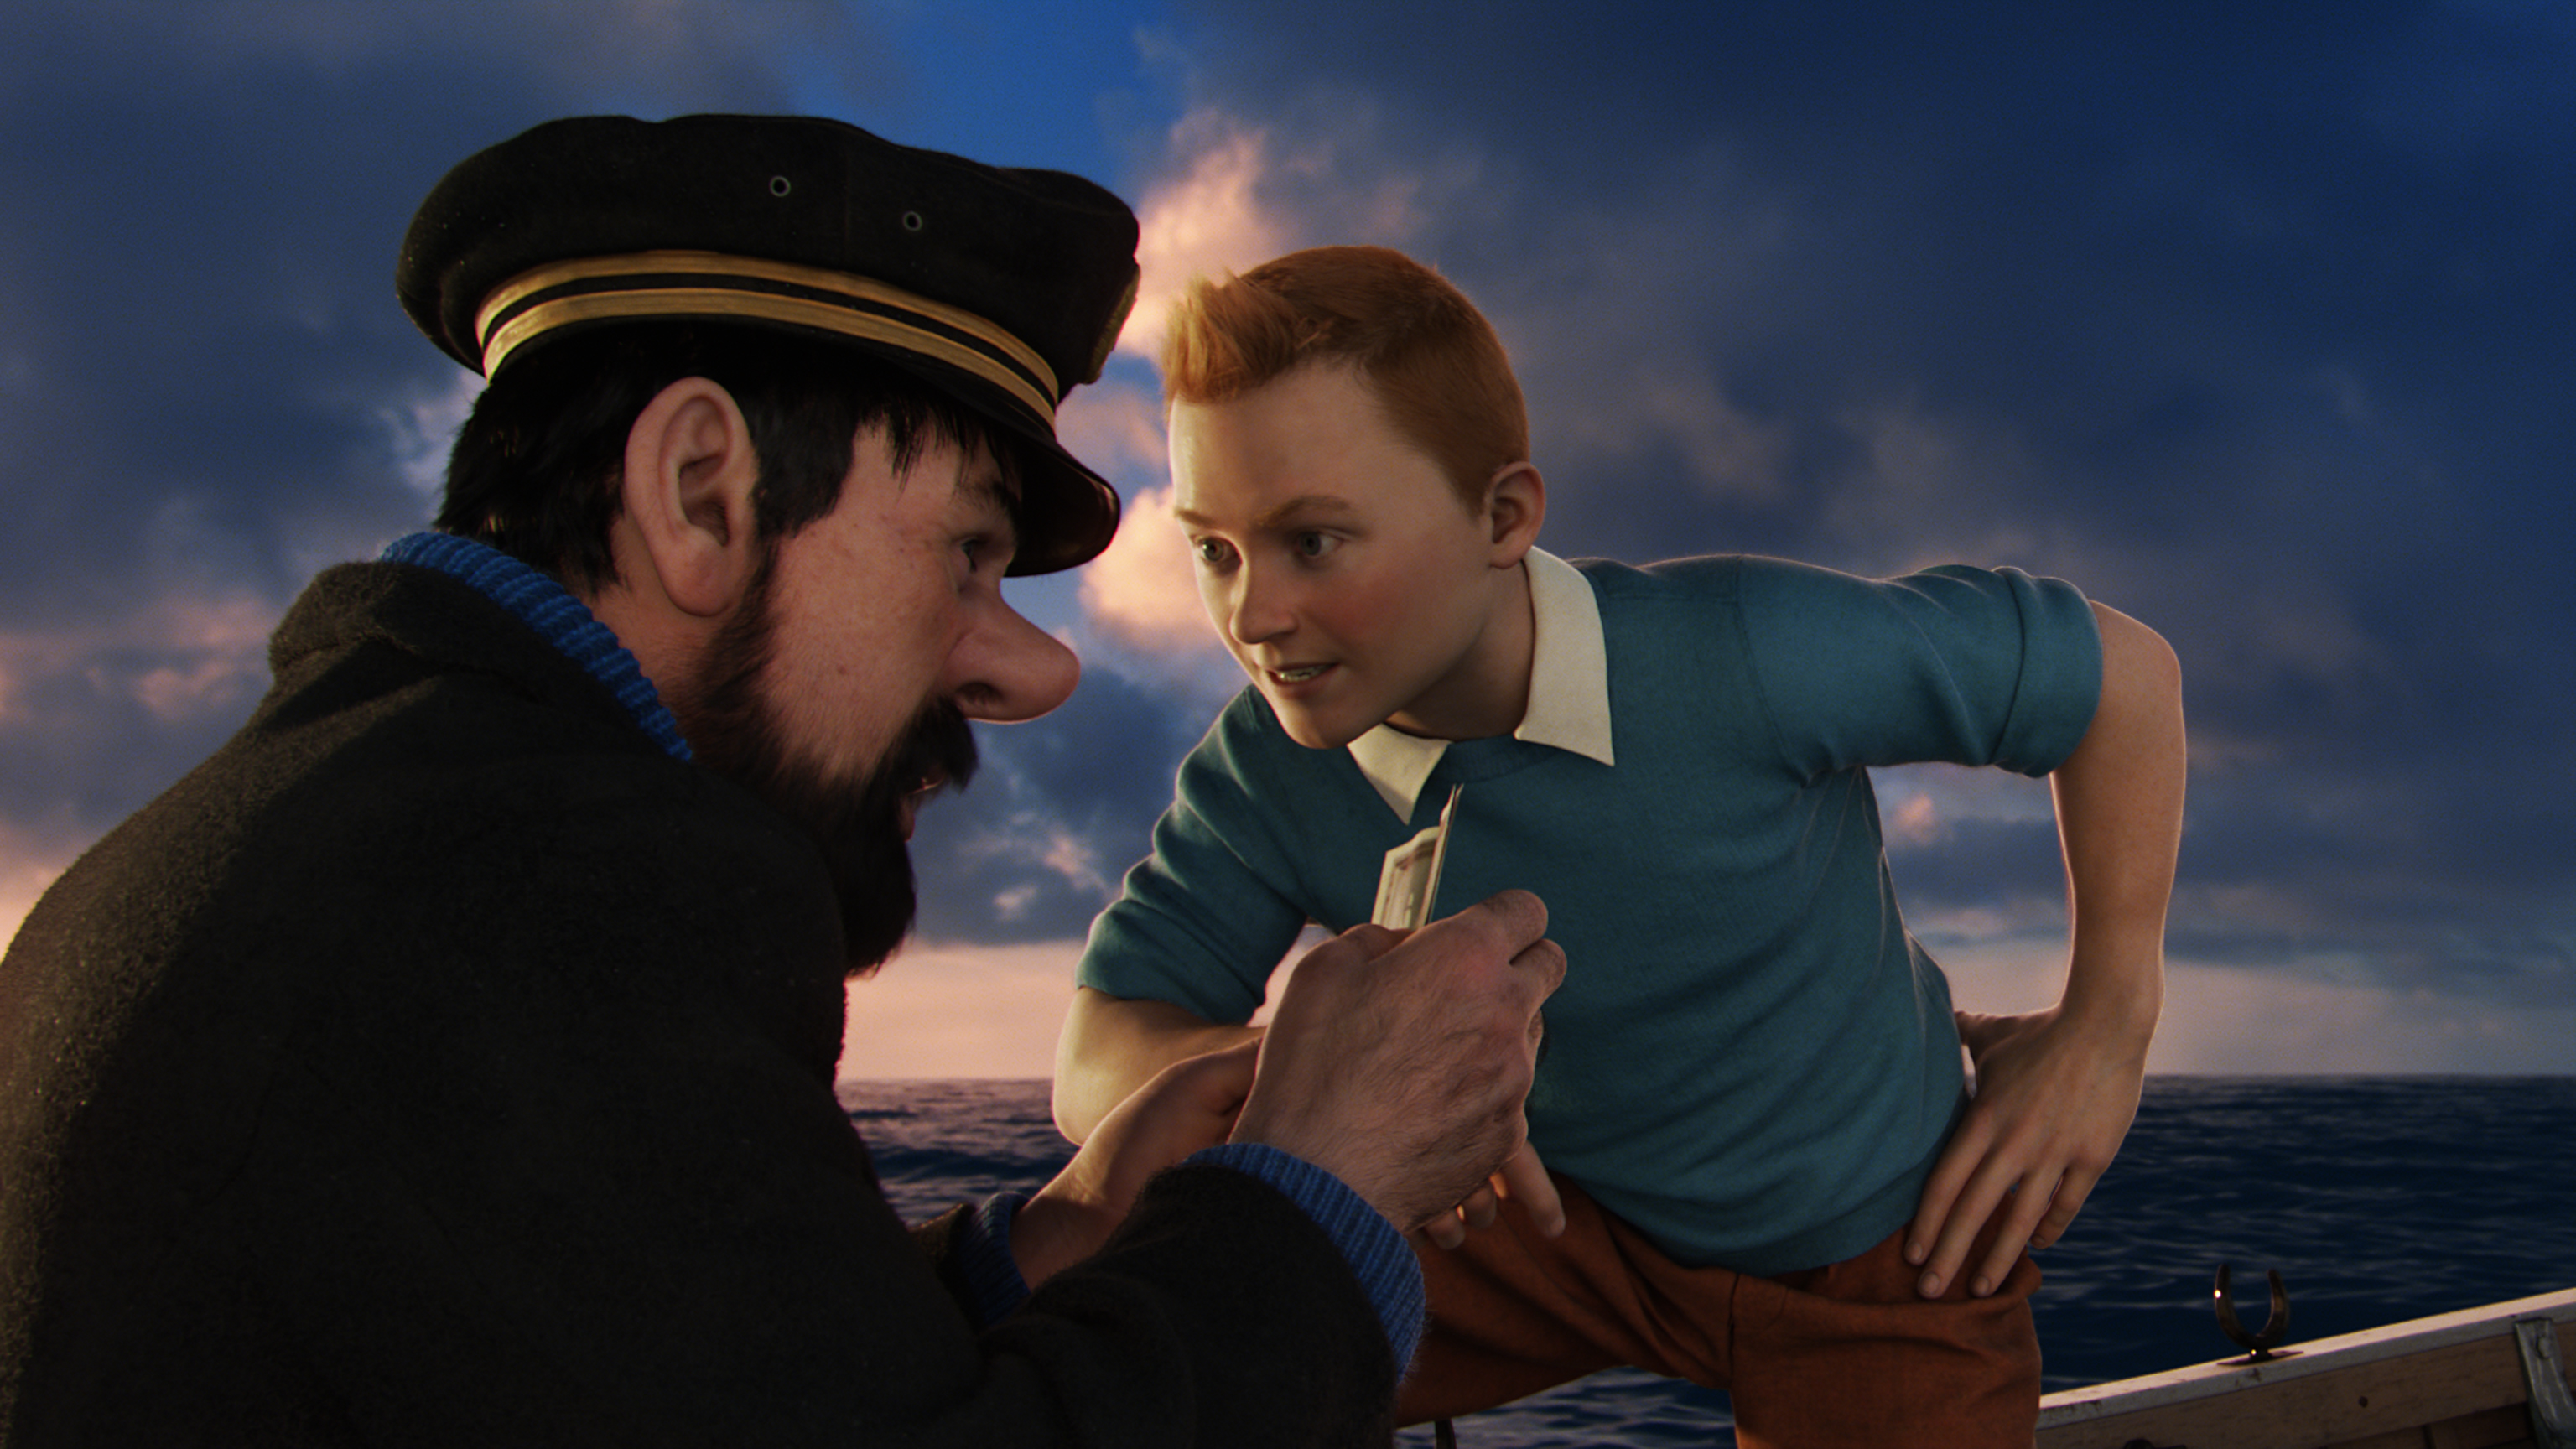 3072x1728 > The Adventures Of Tintin Wallpapers